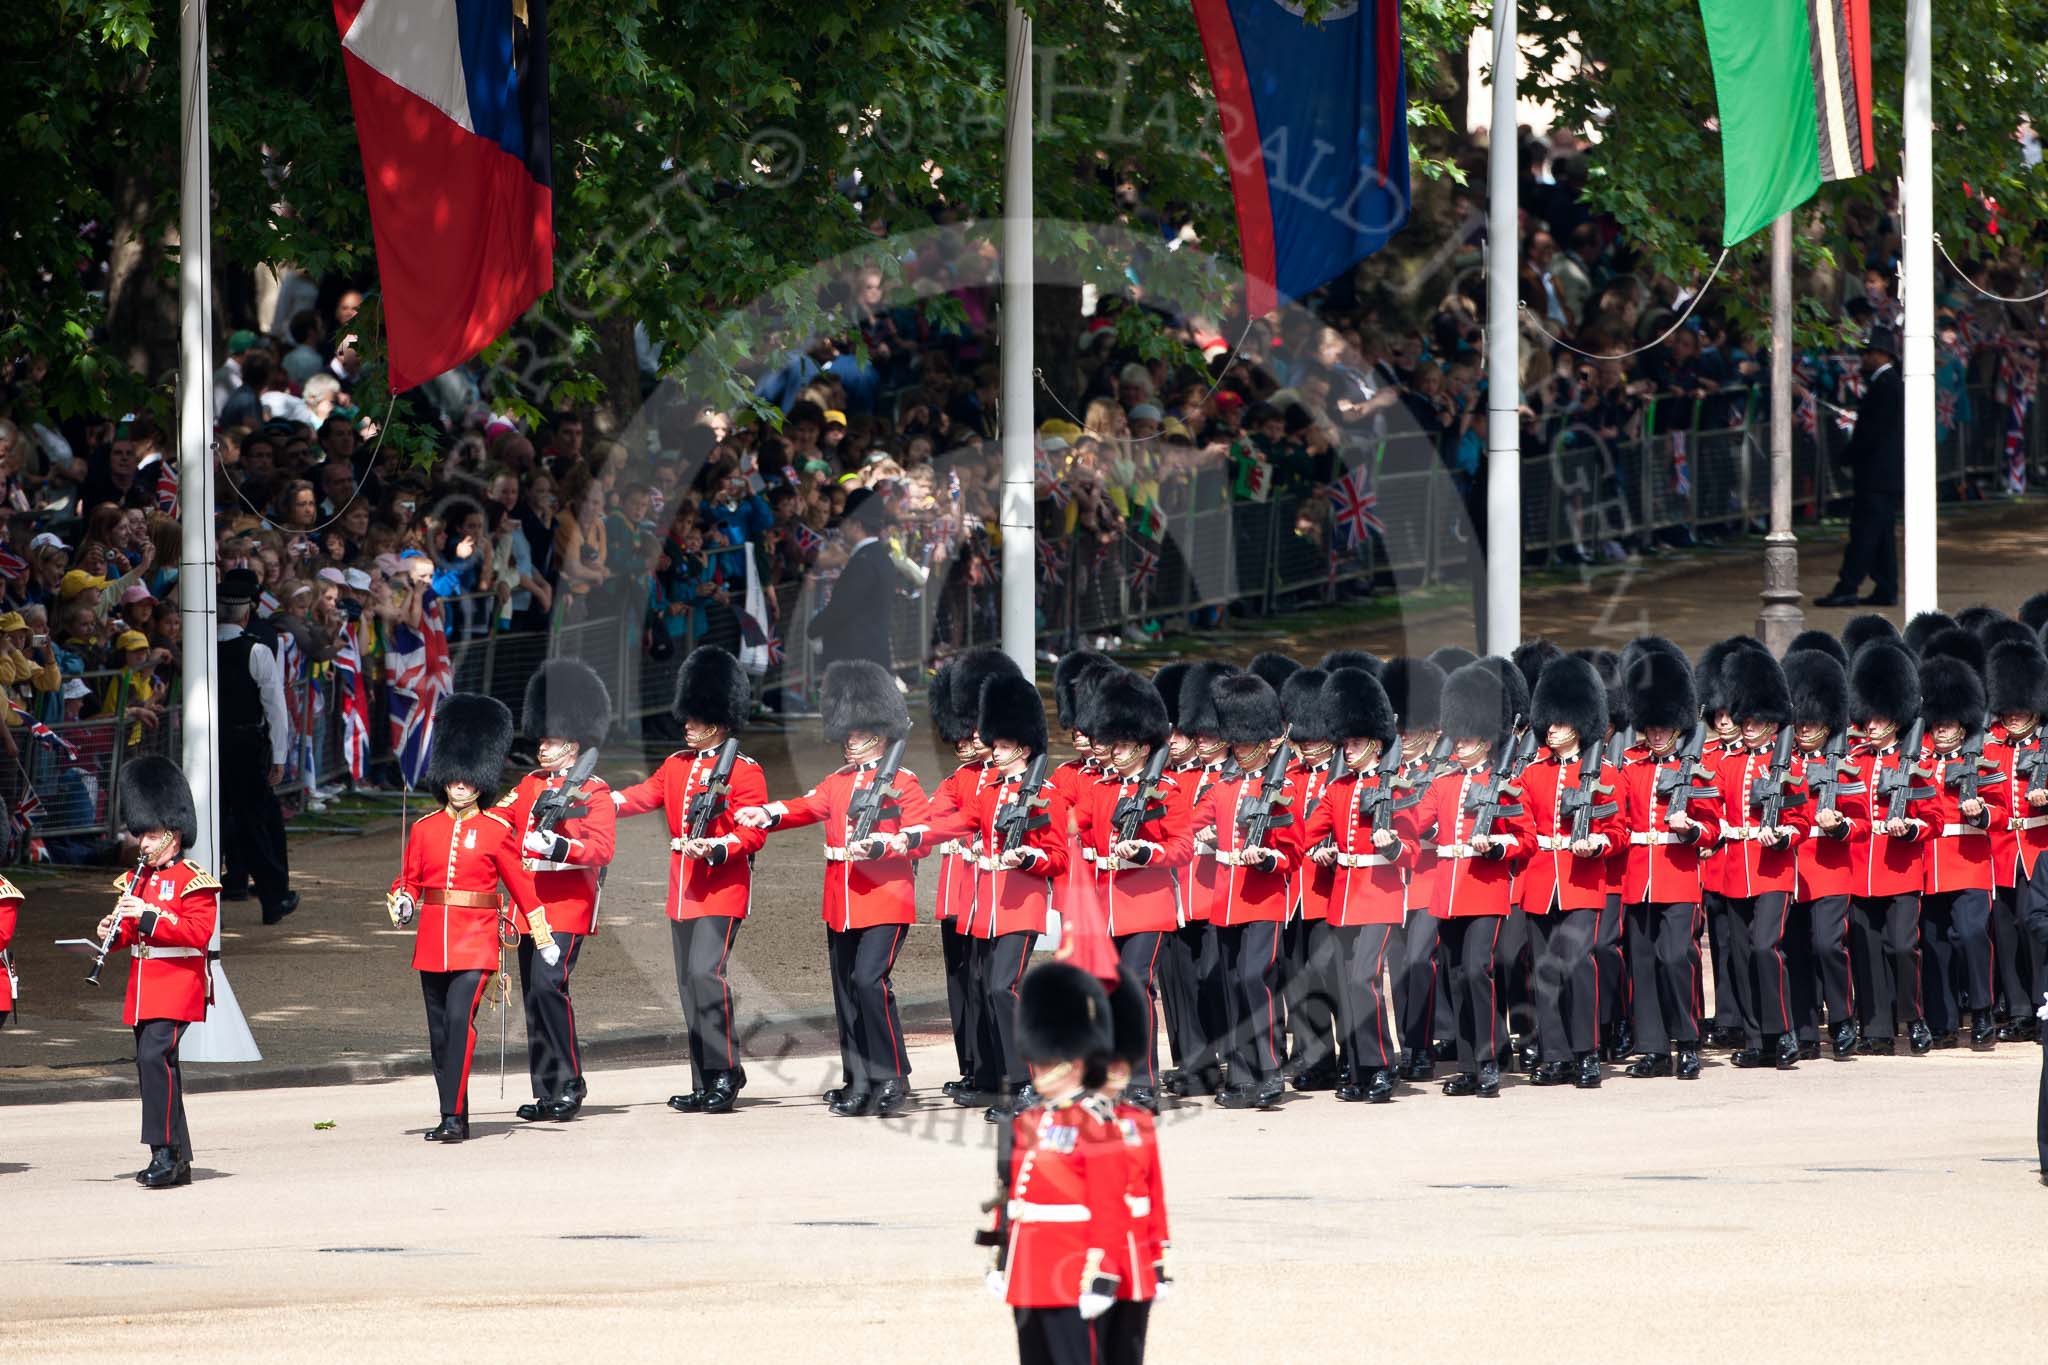 Trooping the Colour 2009: No.7 Guard, No.7 Company Coldstream Guards, marching down Horse Guards Road towards the parade ground..
Horse Guards Parade, Westminster,
London SW1,

United Kingdom,
on 13 June 2009 at 10:19, image #31